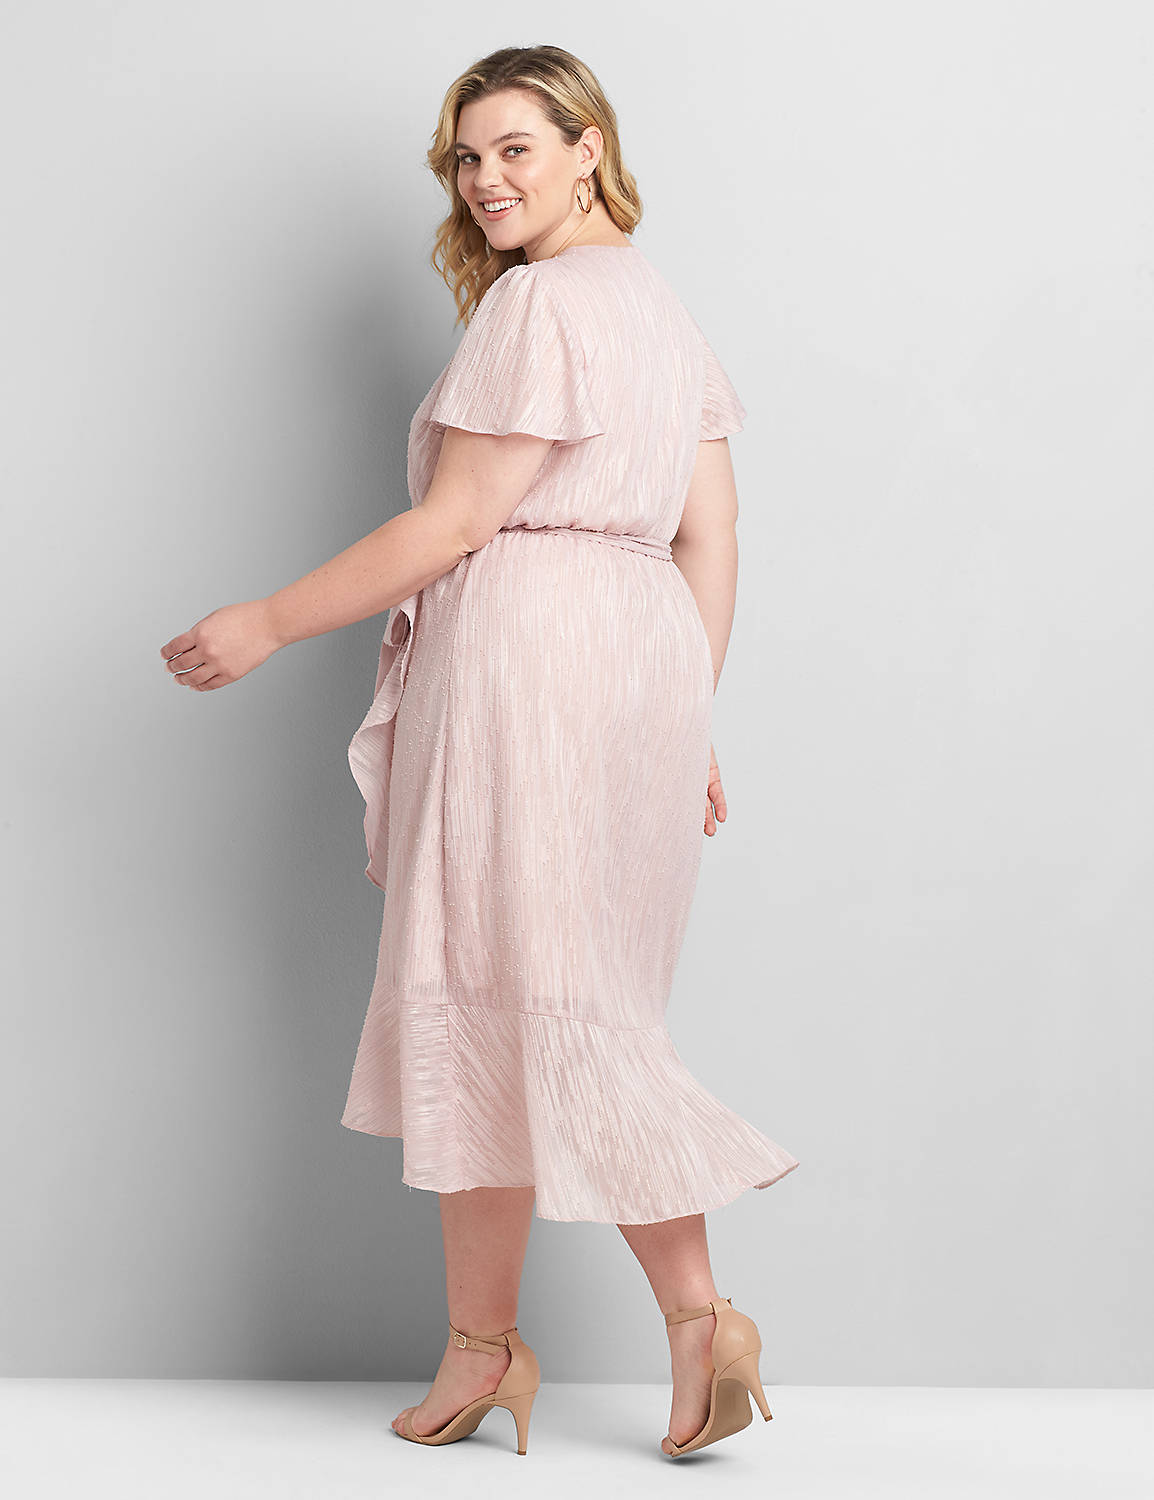 Short Flutter Sleeve Vneck Wrap Dress In Chiffon 1119442:Pink As Is:28 Product Image 2